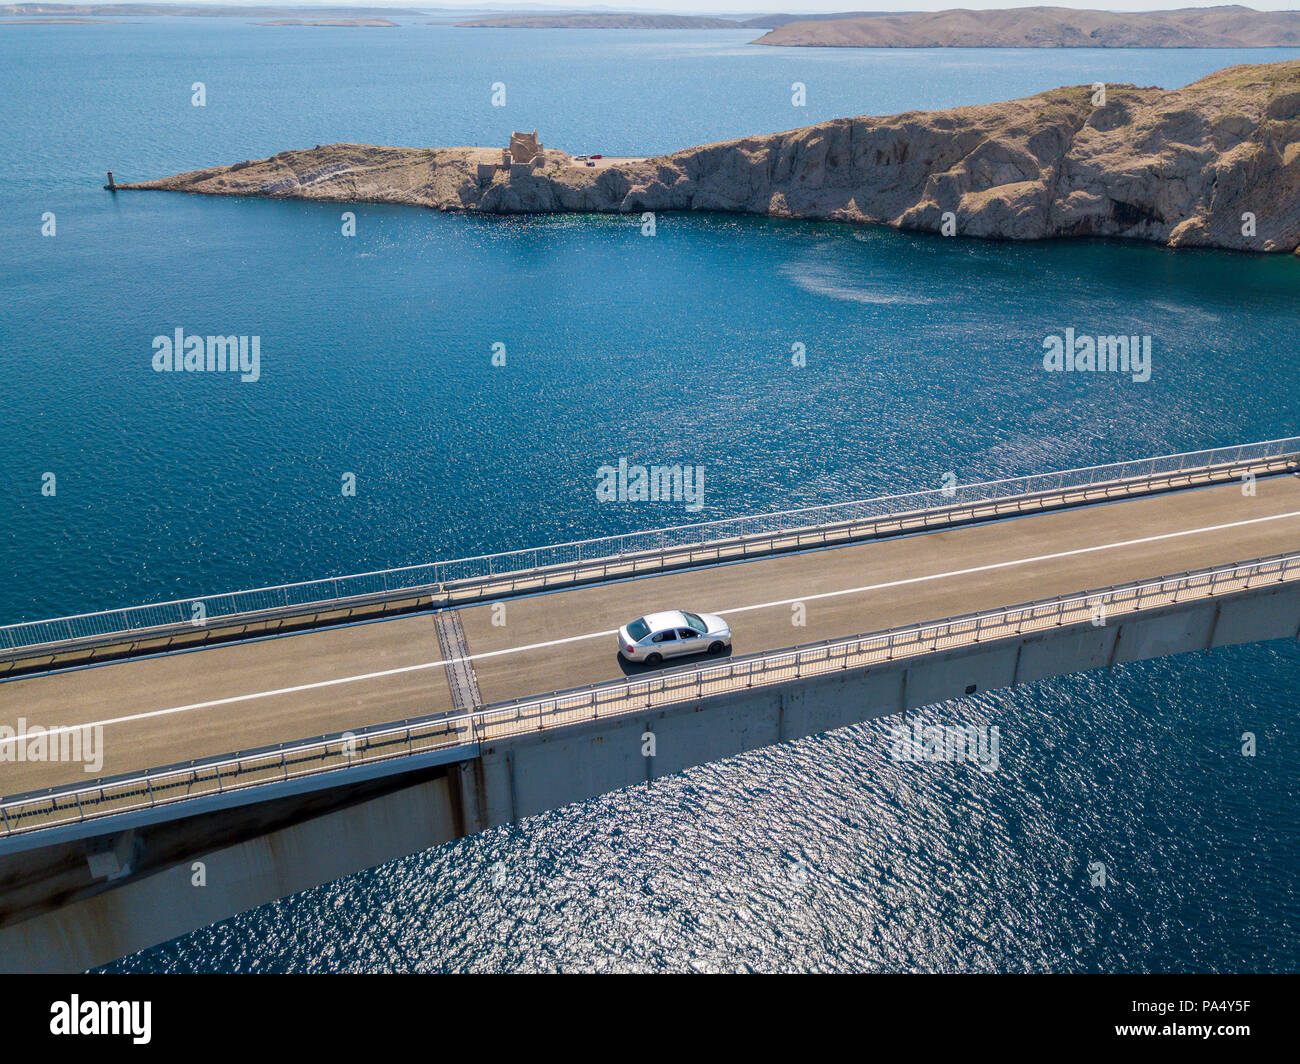 Aerial view of the bridge of the island of Pag, Croatia. Ruins of ancient Fortress Fortica on Pag Island, Croatia. Speedboat passing under the bridge Stock Photo